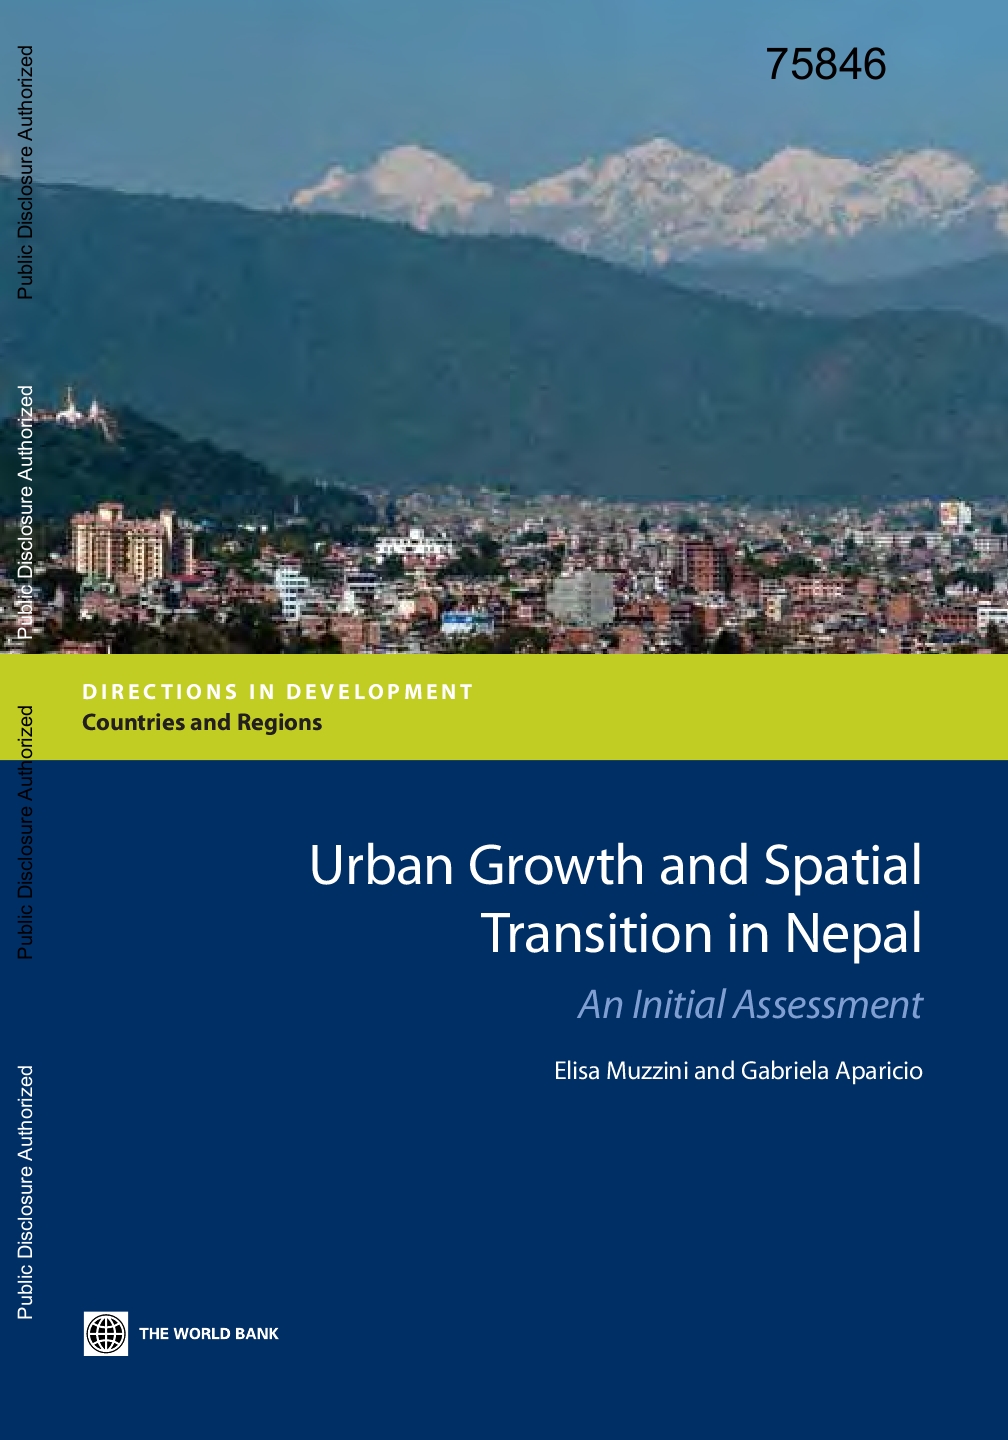 From the Foreward:<div><br></div><div><div>Nepal is undergoing two momentous transformations—from a rural to an urbanizing economy and from a unitary to a federal state. This book aims at understanding the first of these two transitions: Nepal’s journey toward becoming a predominantly urban economy. Nepal is urbanizing rapidly—the Kathmandu Valley is one of the fastest-growing metropolitan regions in South Asia, and small towns are mushrooming in proximity to highways and on the border with India. At this critical juncture of Nepal’s economic development, managing rapid urbanization is essential to improving the competitiveness of the urban economy, creating jobs, and accelerating economic growth. This growth will ultimately lead to reduced poverty.</div><div>The study carries out an initial assessment of Nepal’s transition from a predominantly rural to an urbanizing economy. This assessment aims at strengthening our understanding of the demographic and economic dimensions of the transition, and exploring the links between urbanization and economic growth in the context of Nepal.</div><div>This book has five chapters. Chapter 1 presents an overview of the urban and economic transition in Nepal. Chapter 2 discusses the spatial patterns of Nepal’s rapid urbanization and internal migration—a driving force of urban change—from both a demographic and an economic perspective. Chapter 3 presents an initial assessment of the challenges facing Nepal’s cities in urban planning and the delivery of infrastructure and services. And it discusses the spatial distribution of public expenditure for local infrastructure based on the results of a public expenditure survey carried out as part of the study. Chapter 4 presents a scoping assessment of the growth drivers of Nepal’s urban economies and the main constraints to turning these comparative advantages into competitive advantages. And chapter 5 draws the main conclusions and proposes strategic directions and actions to accelerate urban-based economic growth and foster sustainable urban development.</div></div>